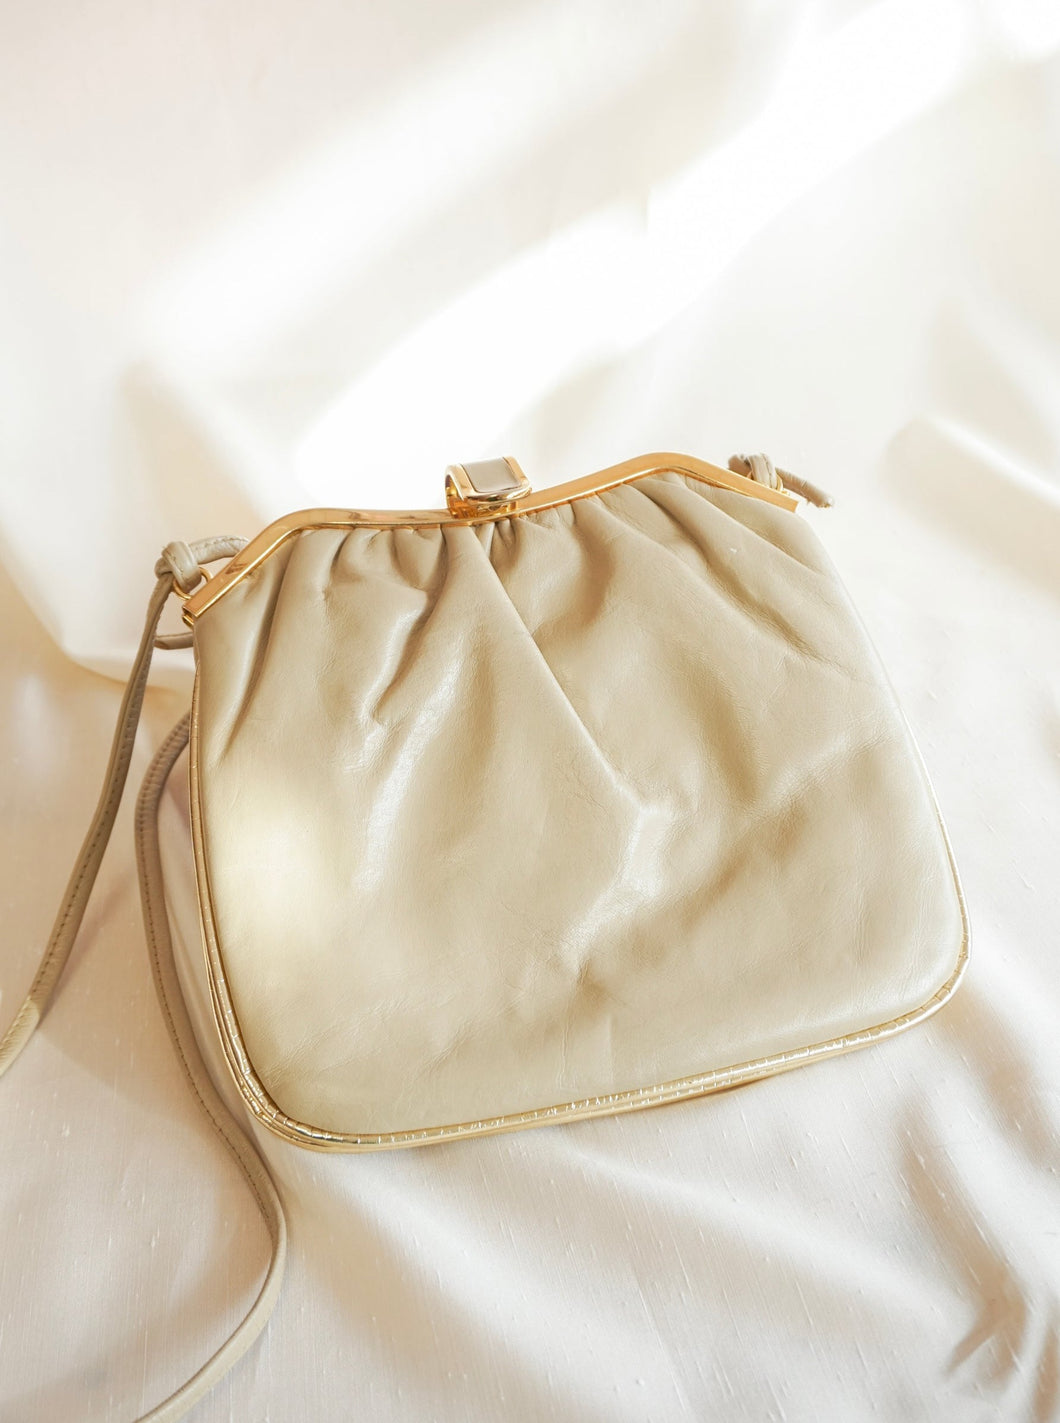 80's beige and gold leather handbag